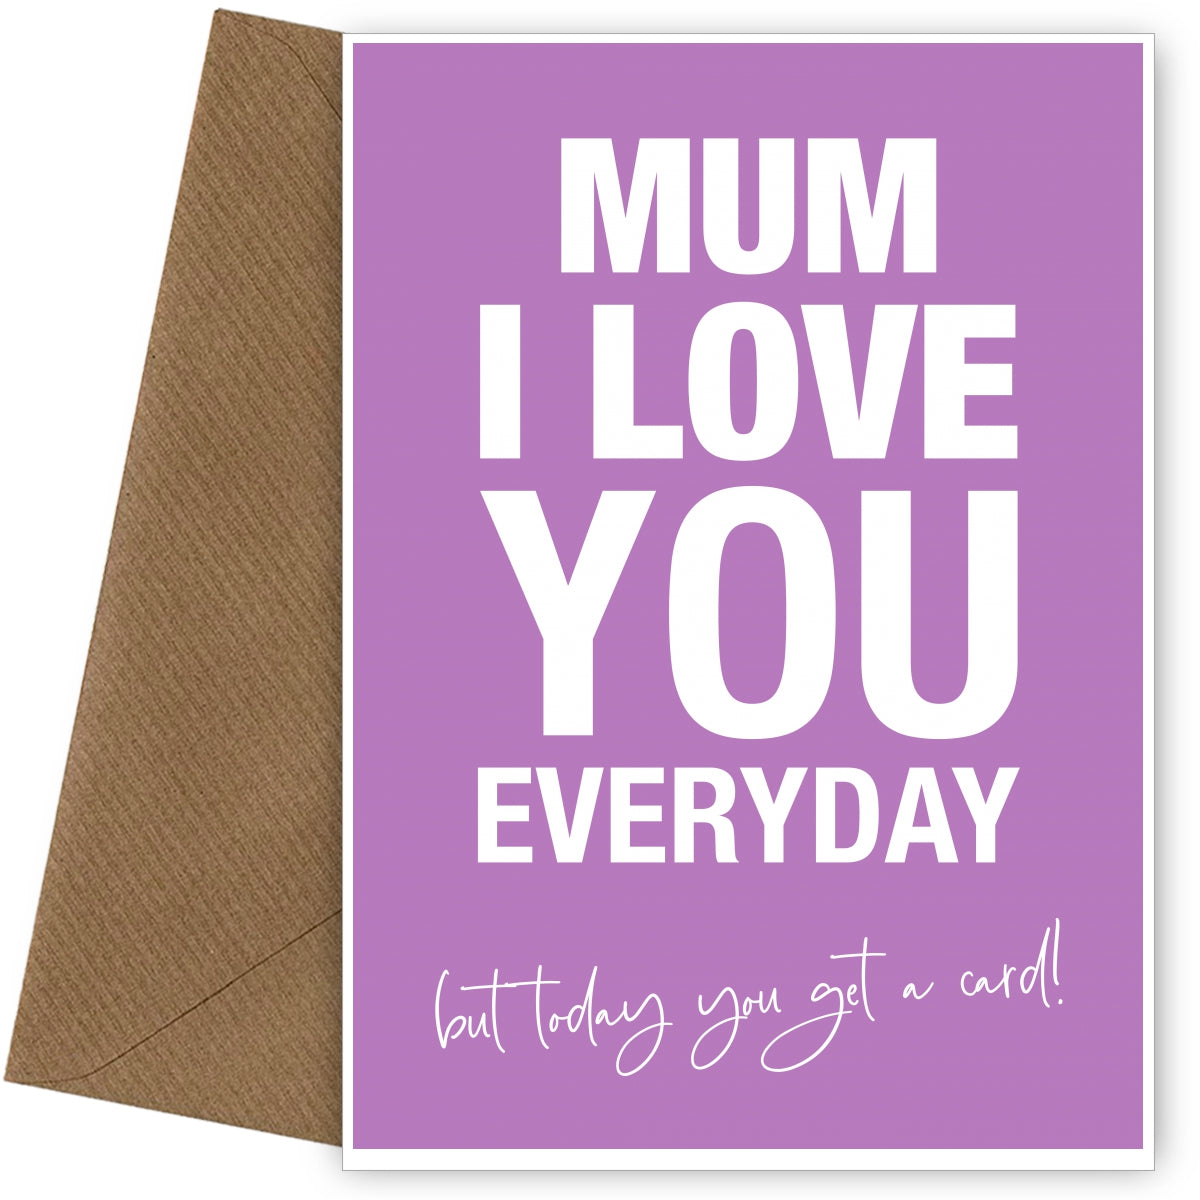 Sarcastic Mother's Day Card for Mum - Love you but today you get a card!